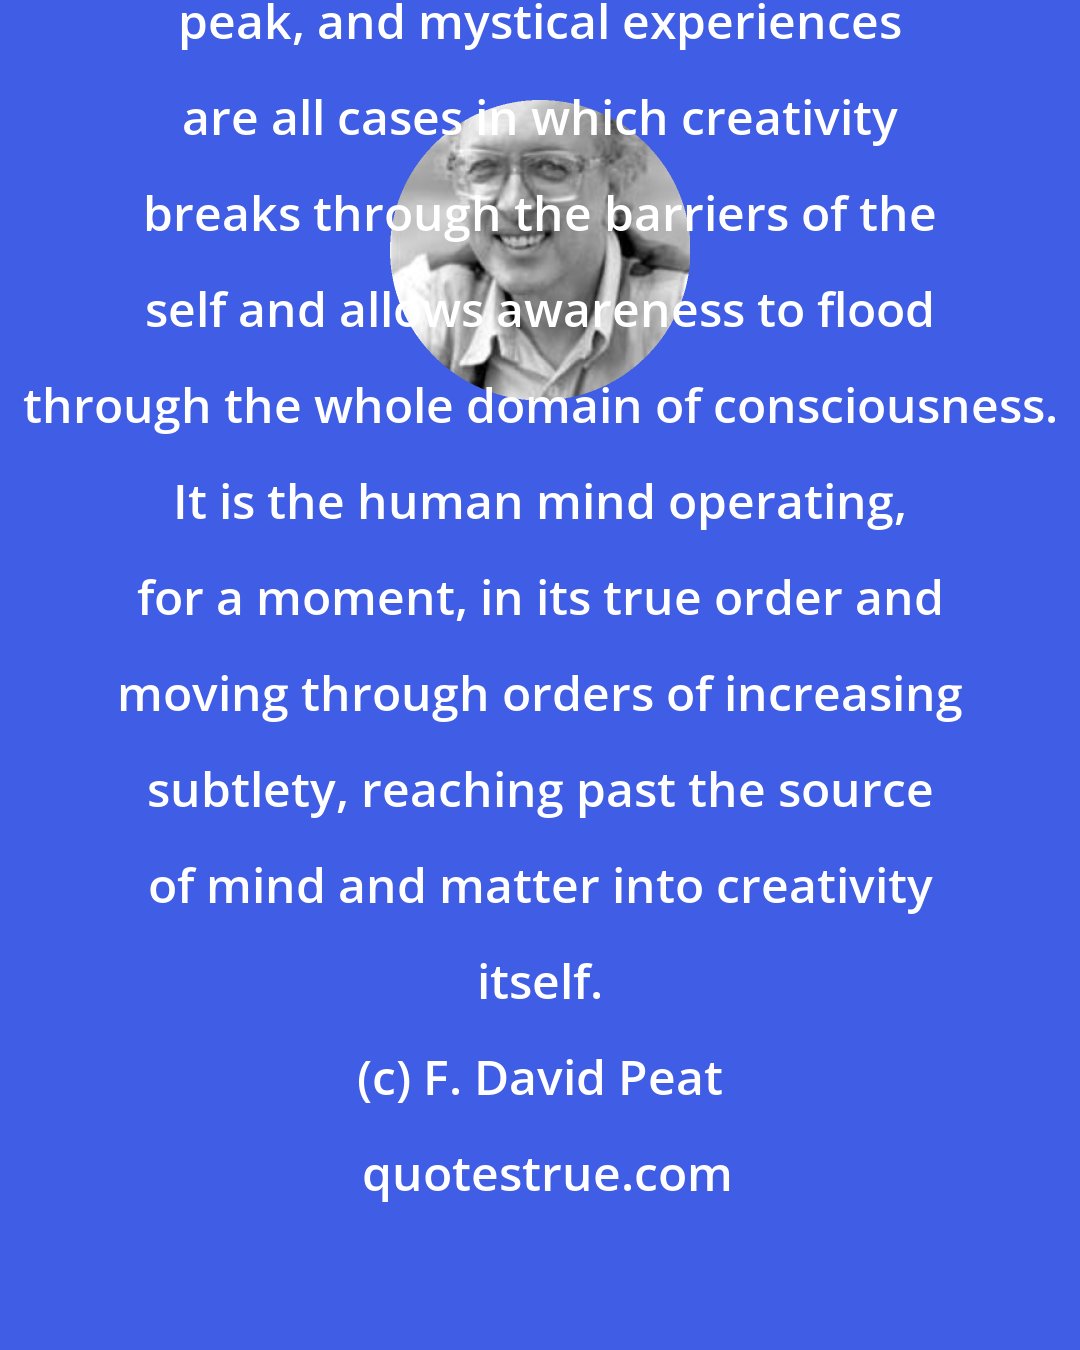 F. David Peat: Synchronicities, epiphanies, peak, and mystical experiences are all cases in which creativity breaks through the barriers of the self and allows awareness to flood through the whole domain of consciousness. It is the human mind operating, for a moment, in its true order and moving through orders of increasing subtlety, reaching past the source of mind and matter into creativity itself.